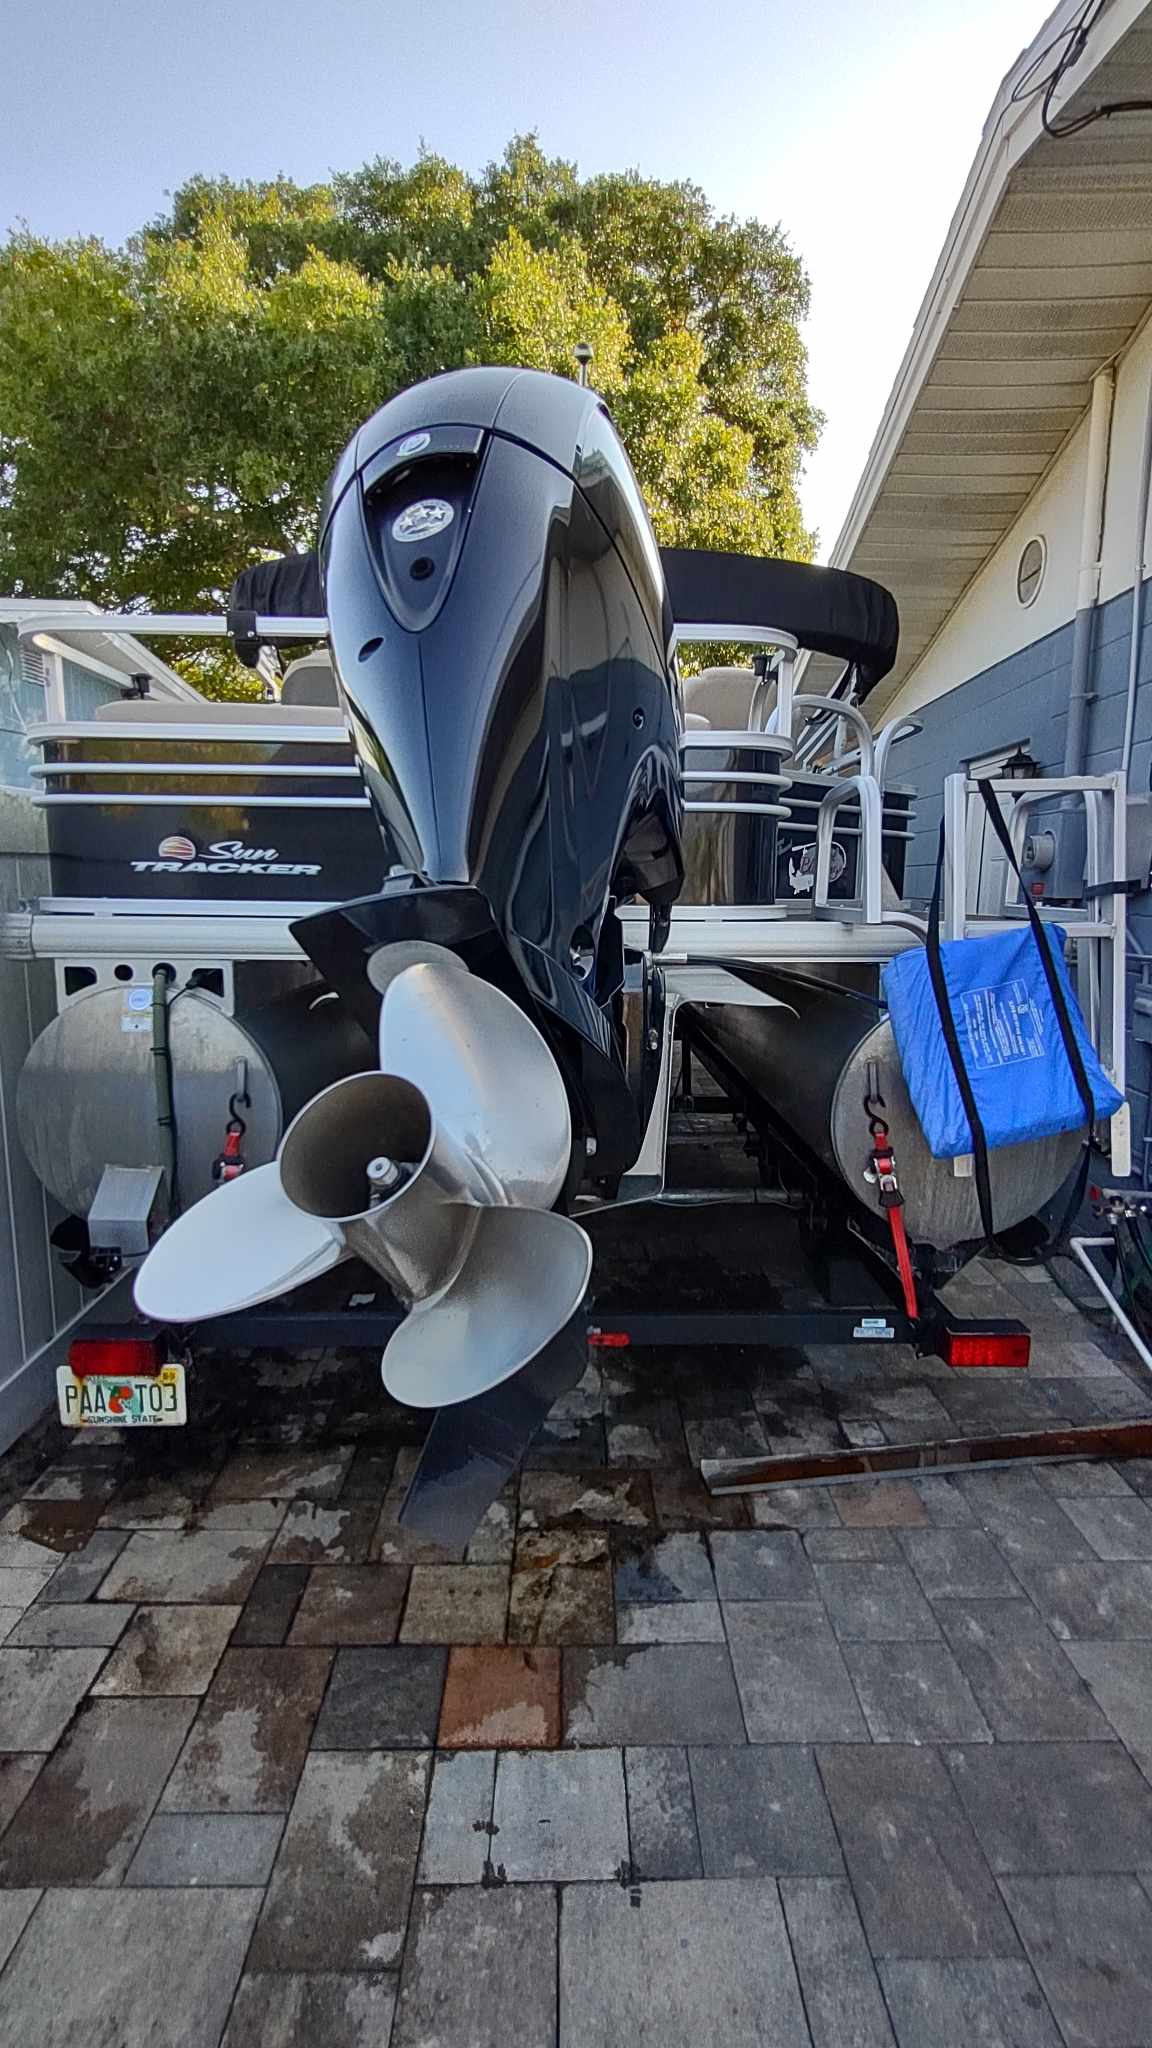 2020 Sun Tracker Fishin' Barge 22 DLX Fishing boat for sale in St Petersburg, FL - image 5 